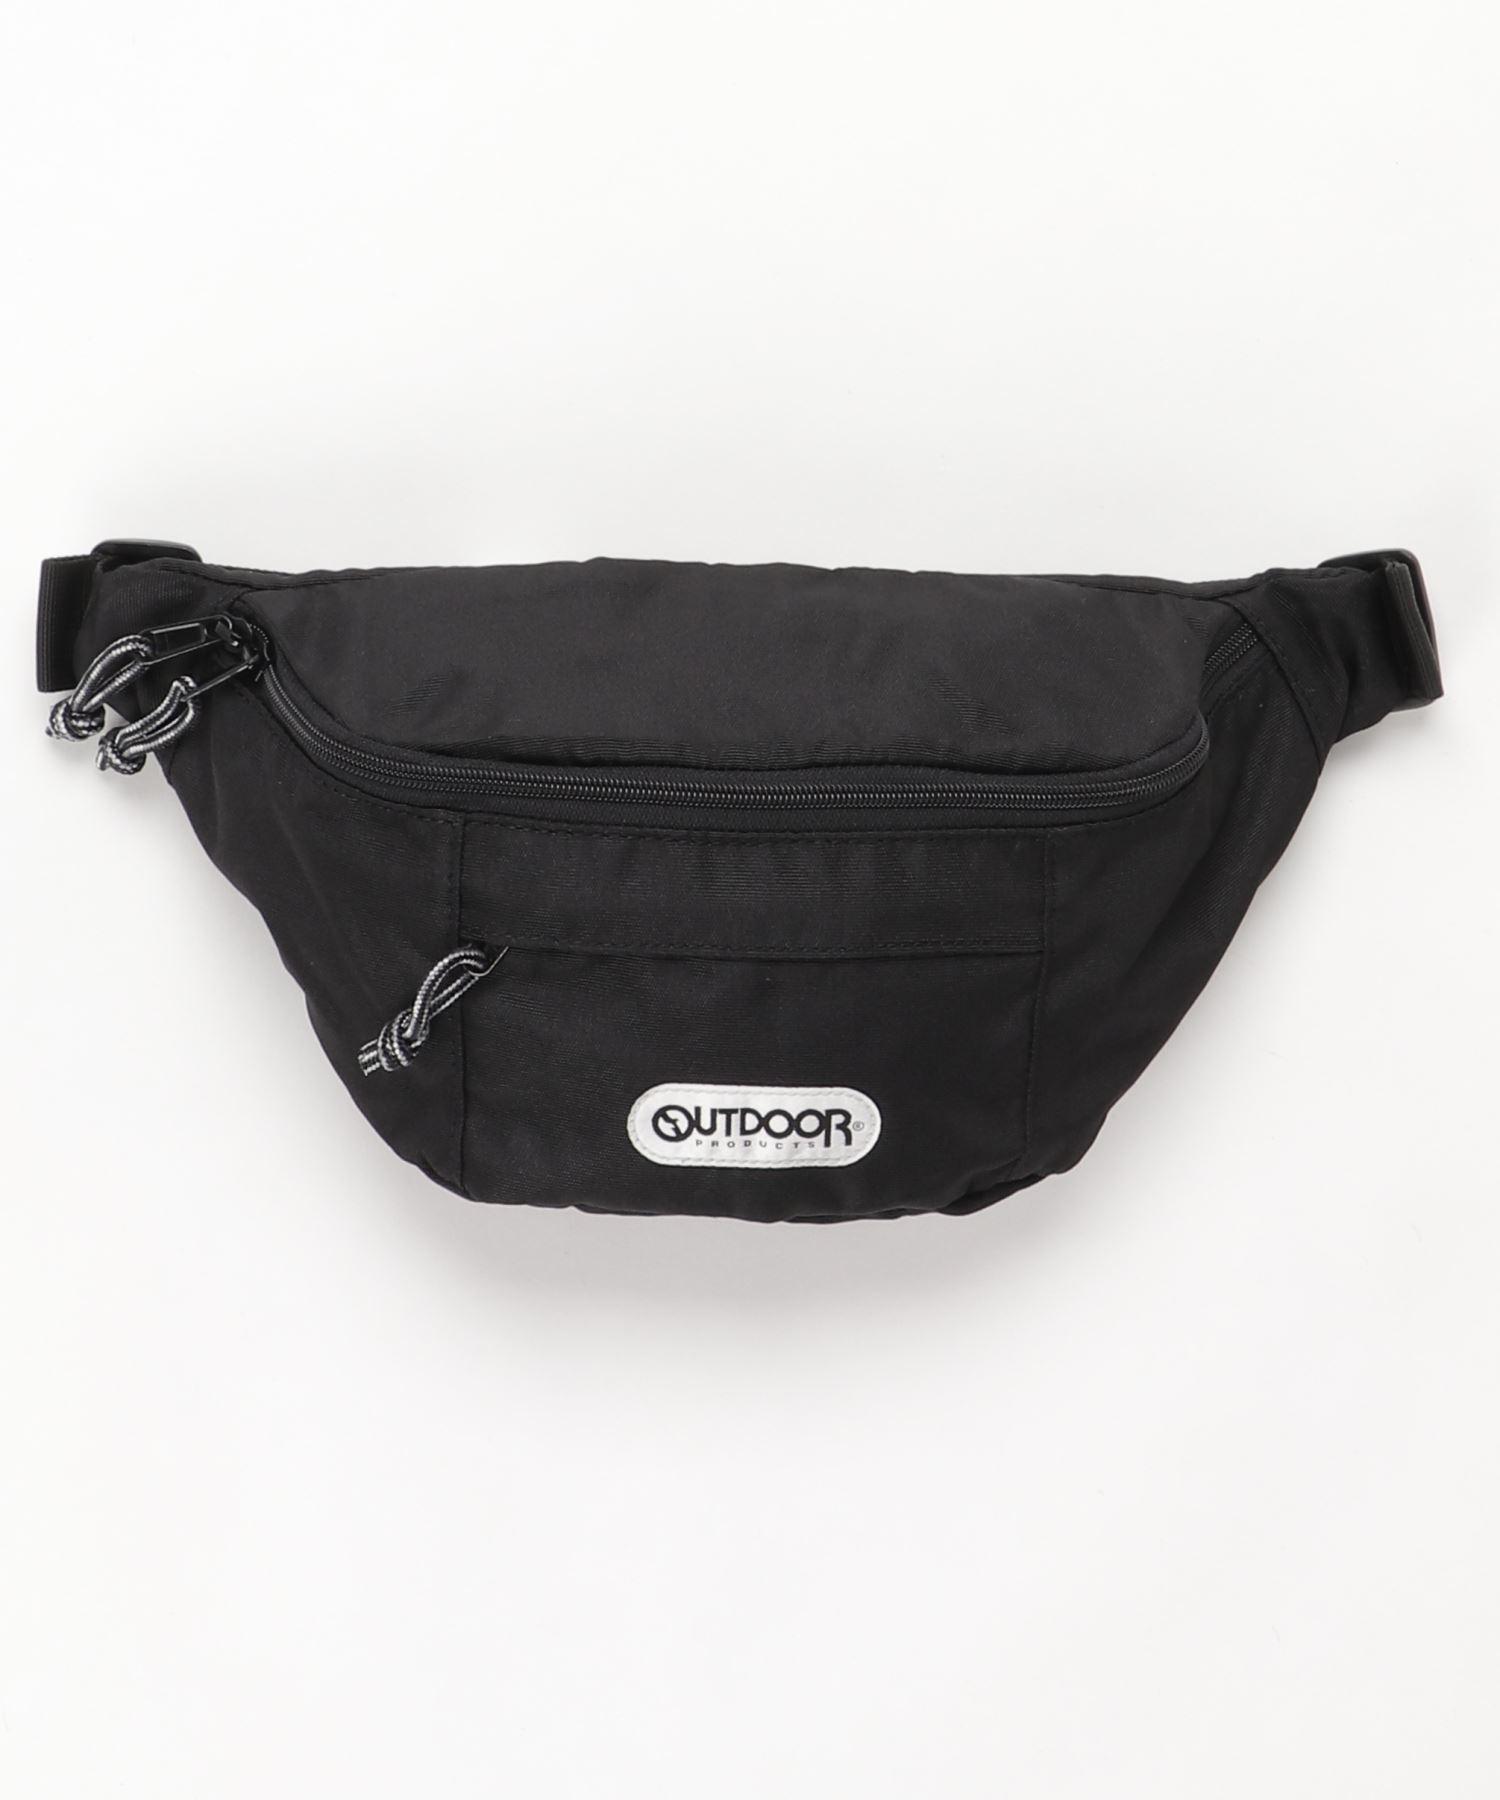 MAY HIP BAG ウエストバッグ ショルダーバッグ OUTDOOR PRODUCTS│アウトドアプロダクツ（OUTDOOR  PRODUCTS）公式通販サイト